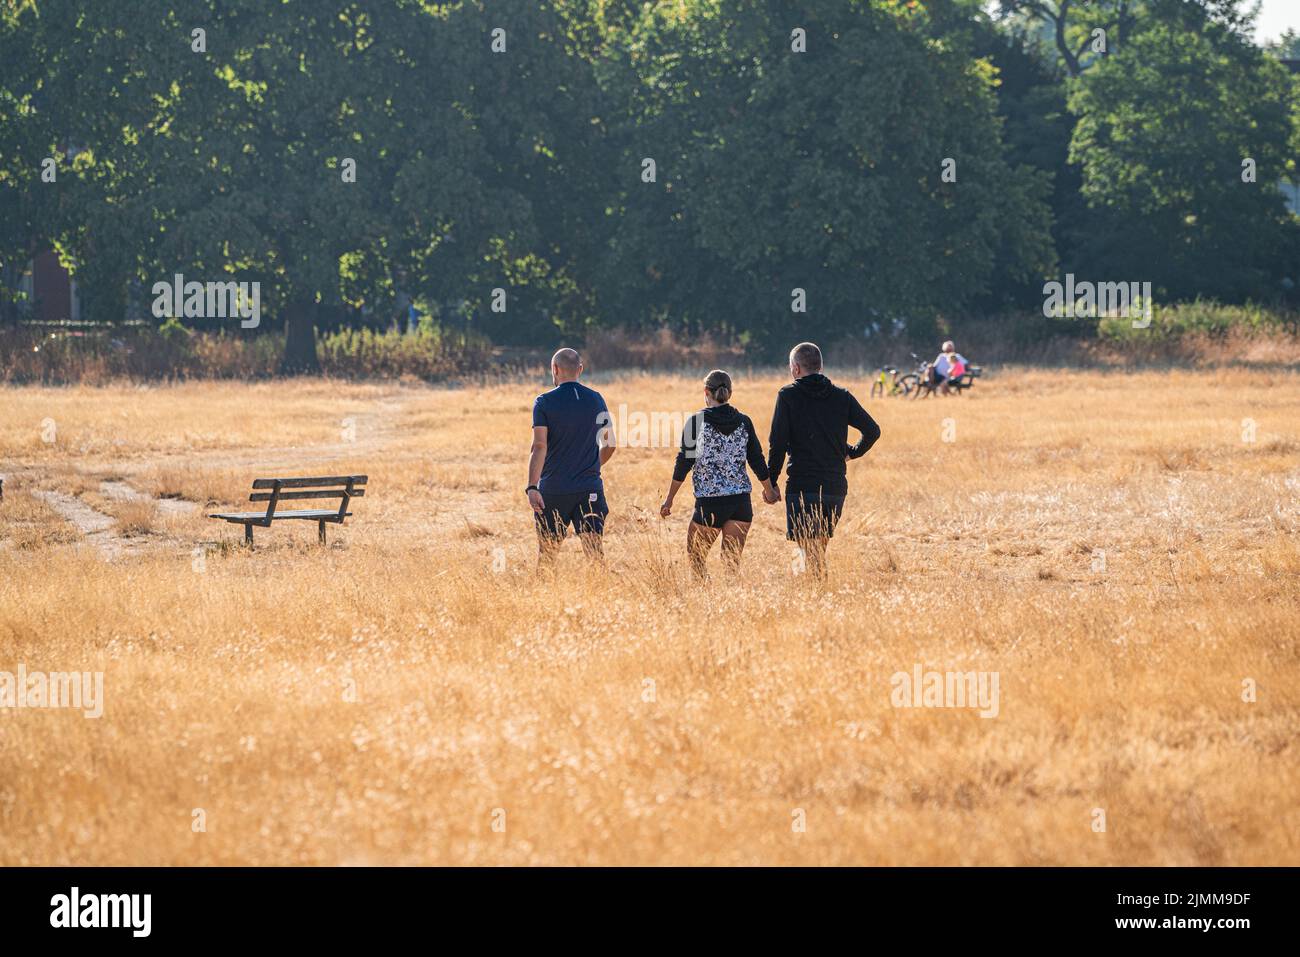 Wimbledon, London, UK. 7 August 2022  People walking on the parched sunburnt  grass  on a bright morning on Wimbledon Common, south west London  as the hot weather and a lack of rainfall continue to grip much of the south of England and the UK, with temperatures expected to reach  above 30celsius  by next weekCredit. amer ghazzal/Alamy Live News Stock Photo